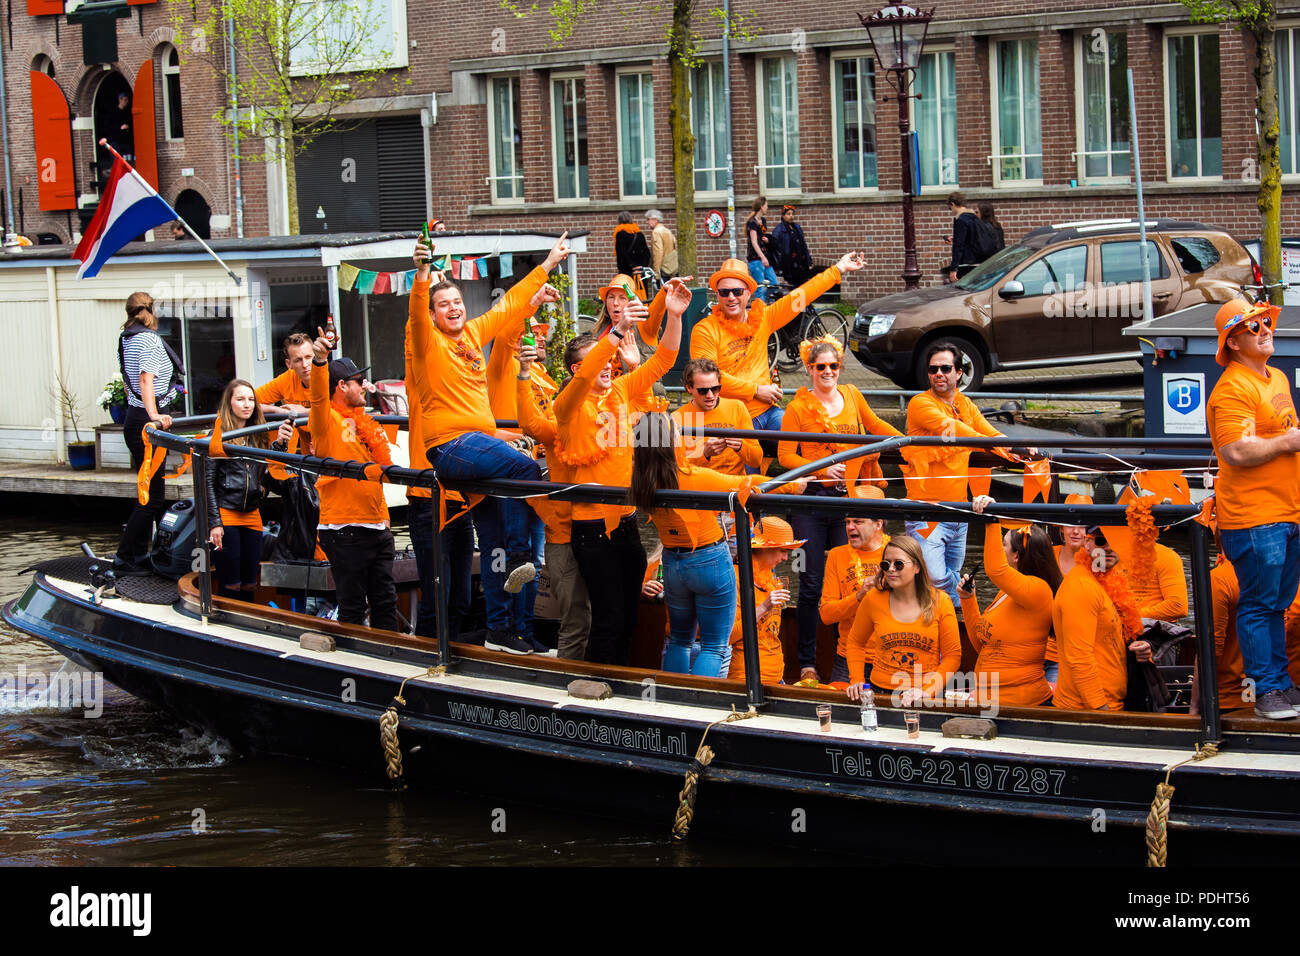 Amsterdam, Netherlands - April, 2018: Boats on Amsterdam canals with people celebrate King's day in Netherlands Stock Photo